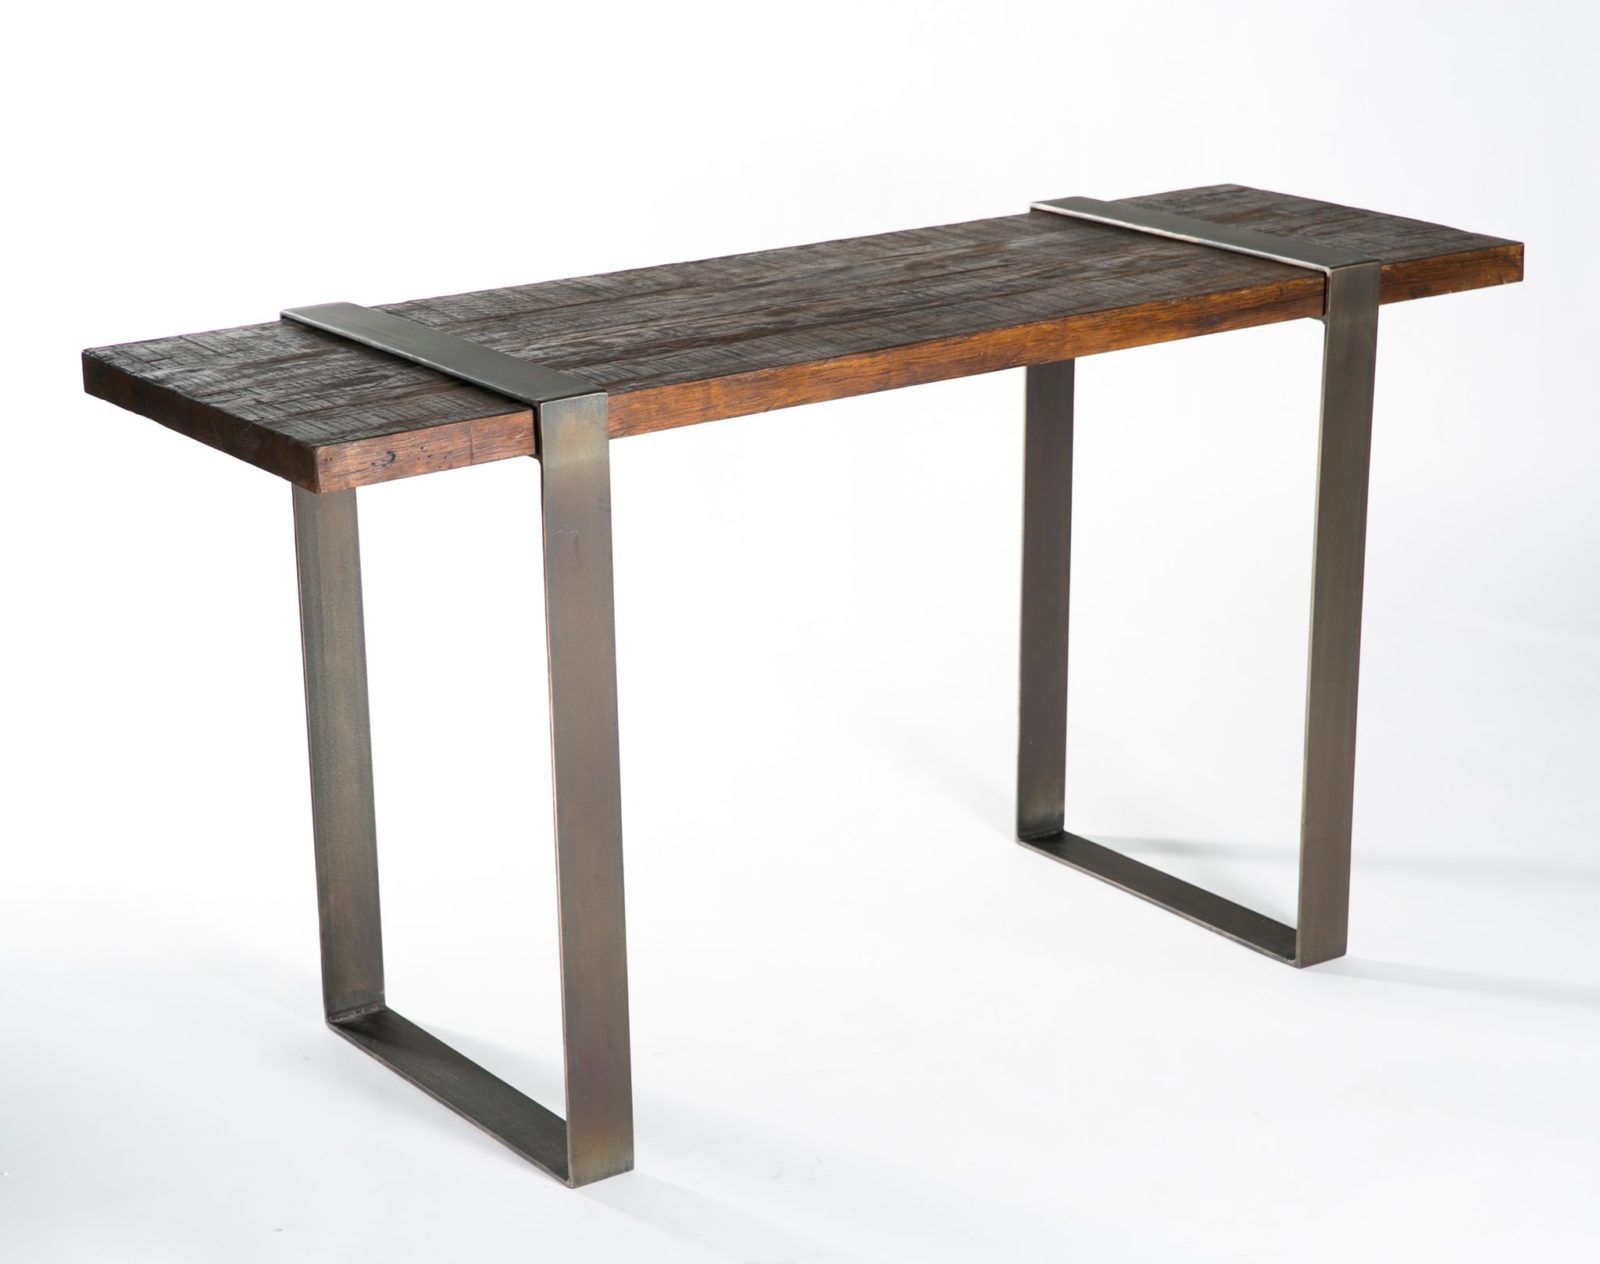 Jackson Console Table With Steel Strap Legs And Reclaimed Wood Top Regarding Oak Wood And Metal Legs Console Tables (View 4 of 20)